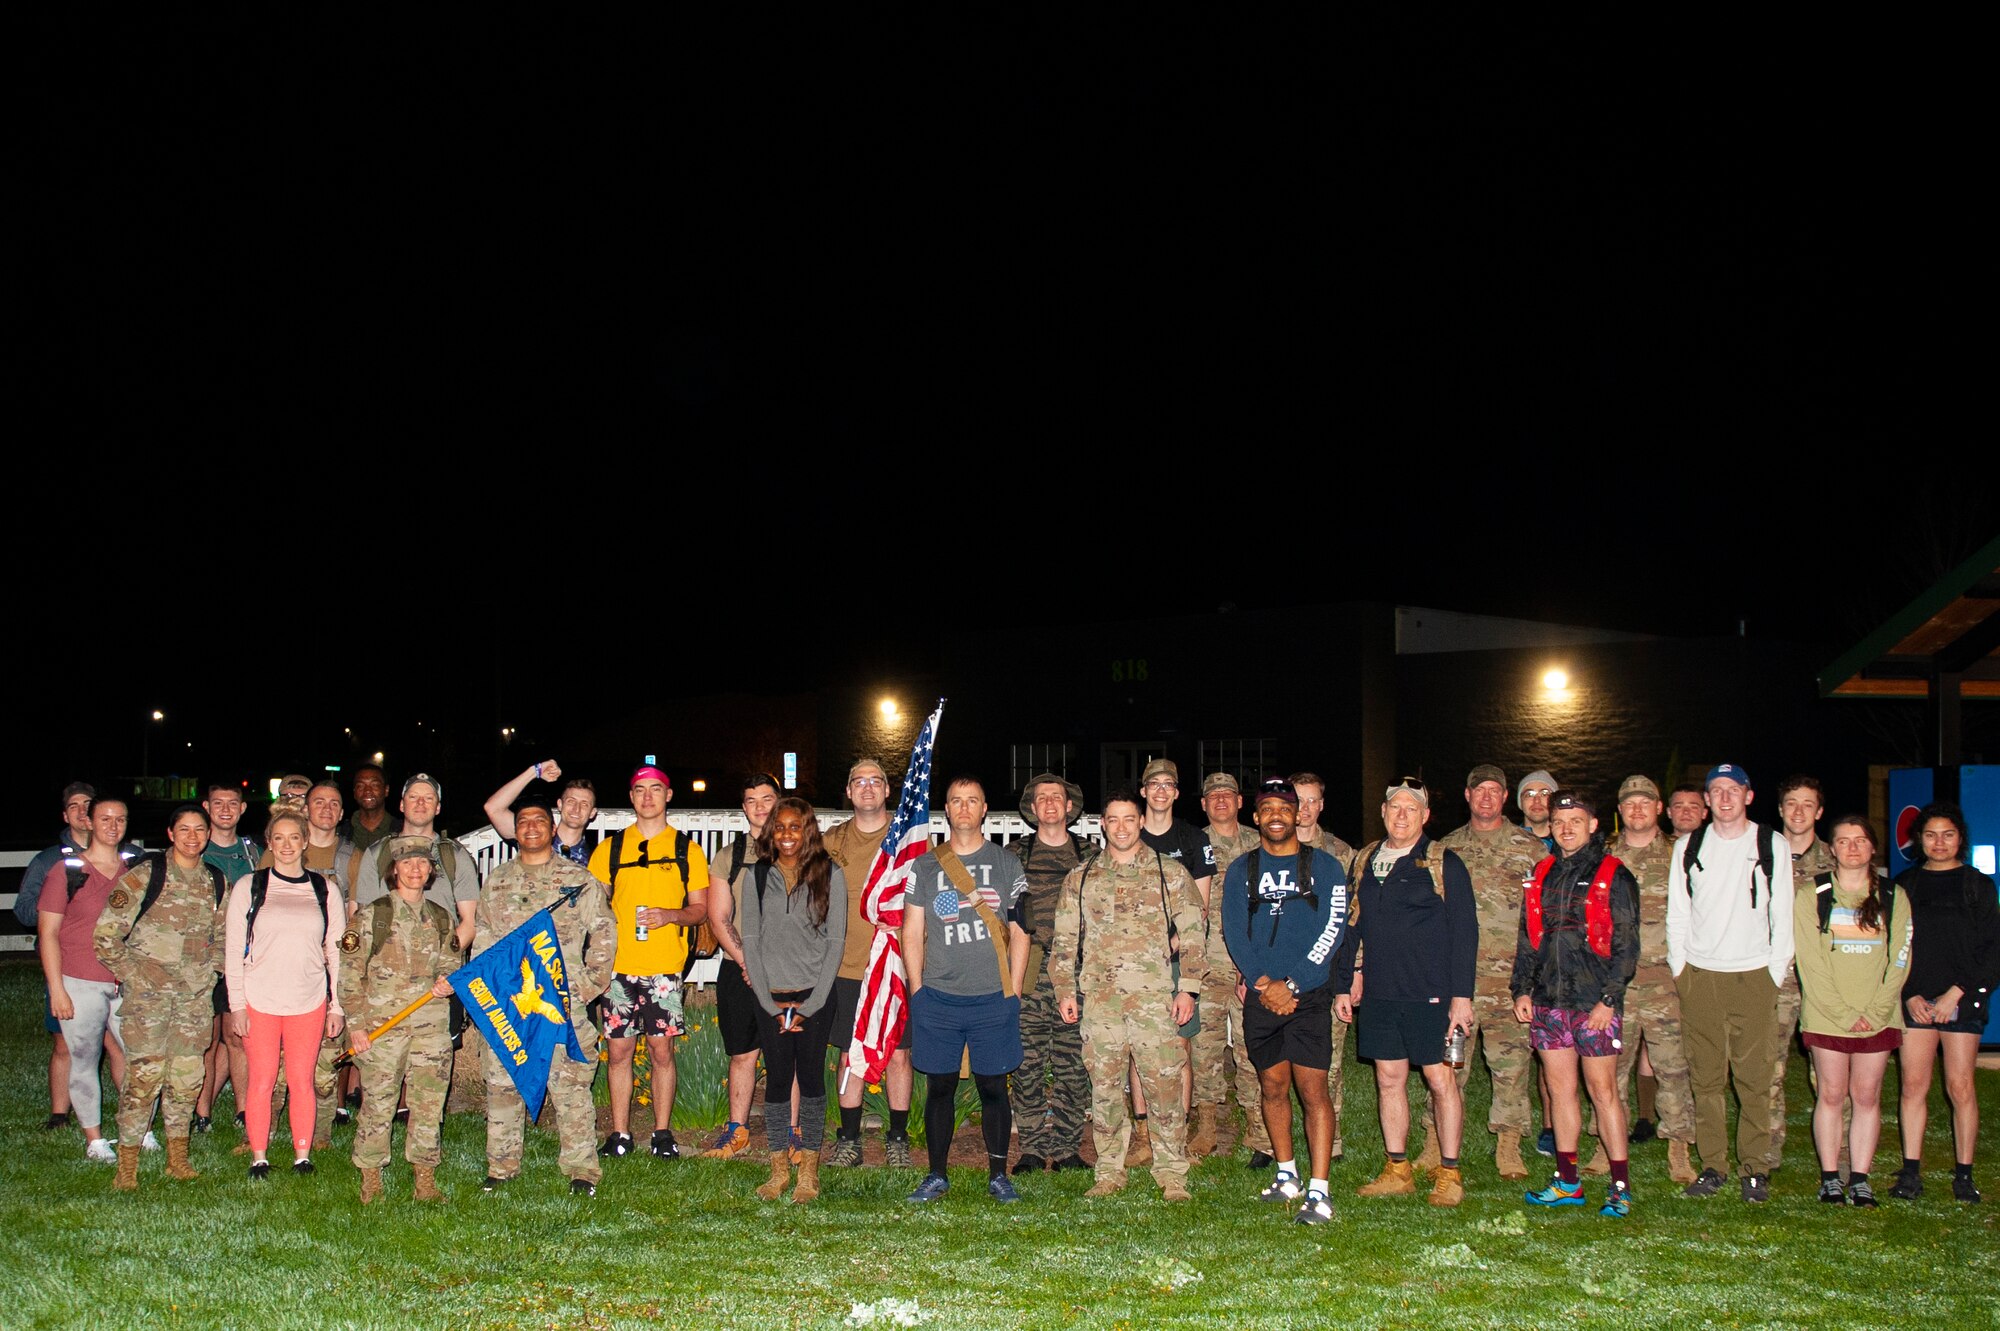 More than 30 civilian and military personnel from the National Air and Space Intelligence Center pose for a group photo before embarking on the Bataan Memorial Death March in Beavercreek, Ohio, April 14, 2023. Organized by U.S. Air Force Technical Sgt. Kyle Townshend and Senior Airman Nathaniel Tillman of NASIC, the ruck commemorates the combined 10,000 American and Filipino soldiers that died in the Bataan Death March, a forced 65-mile march during World War II in April of 1942.